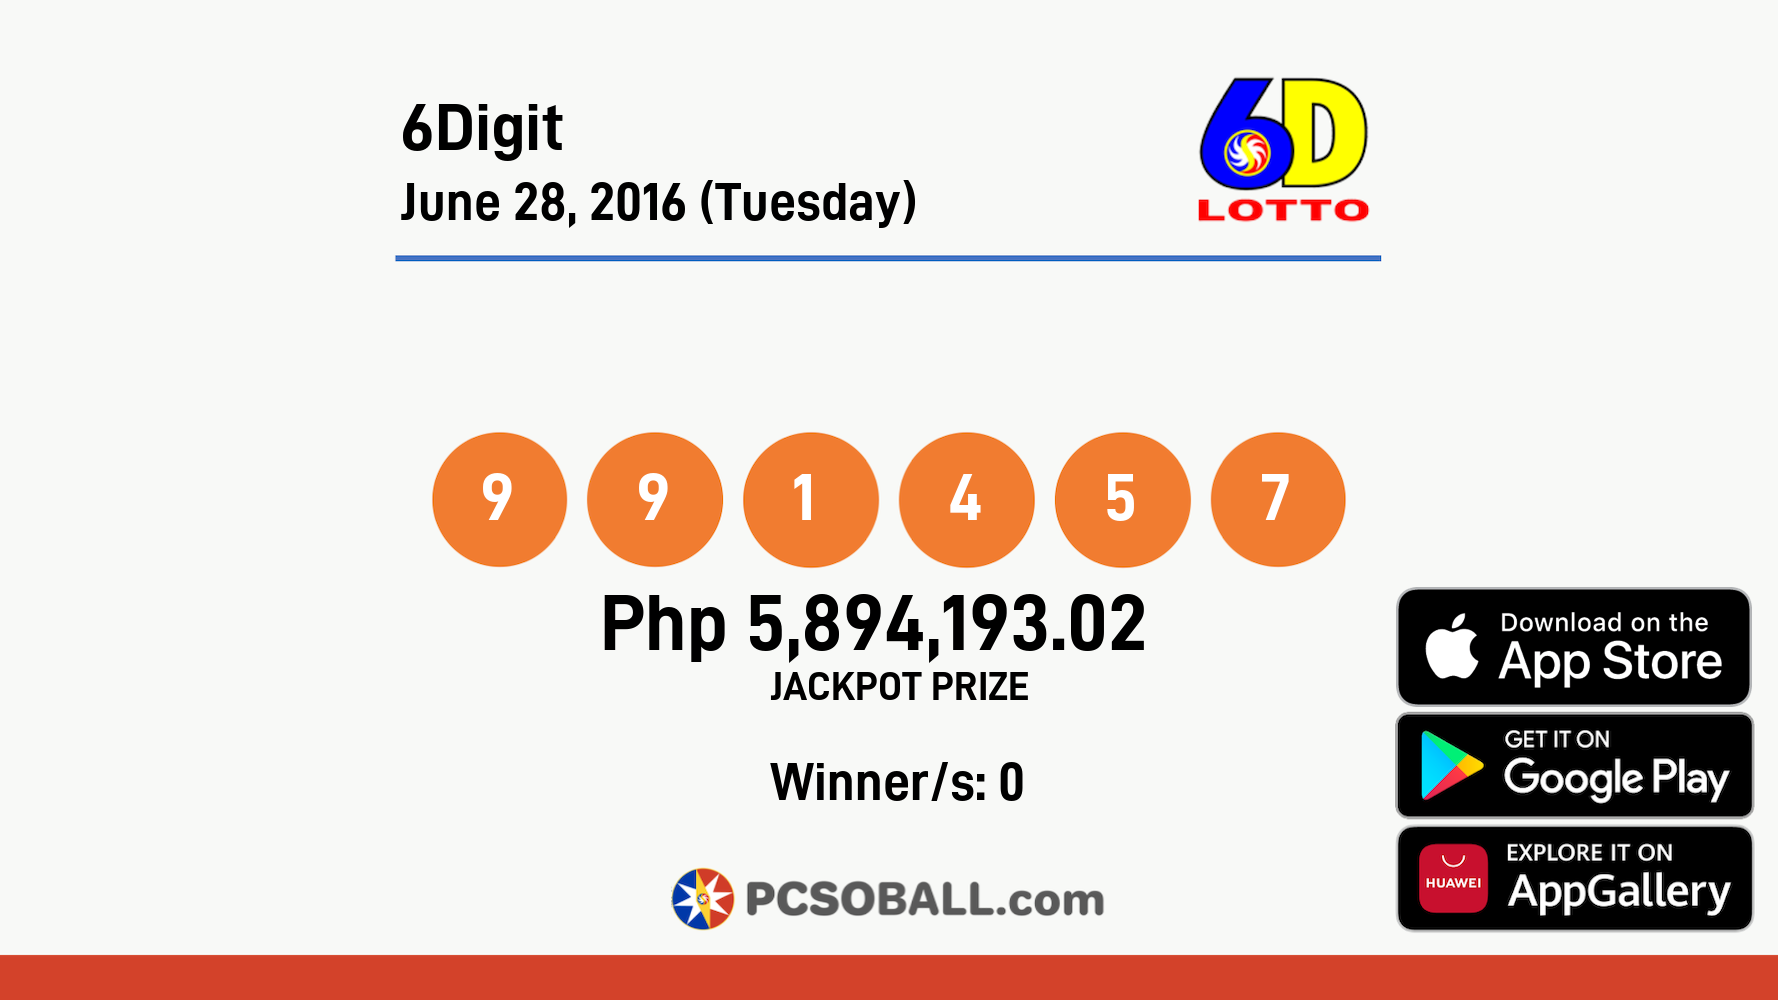 6Digit June 28, 2016 (Tuesday) Result